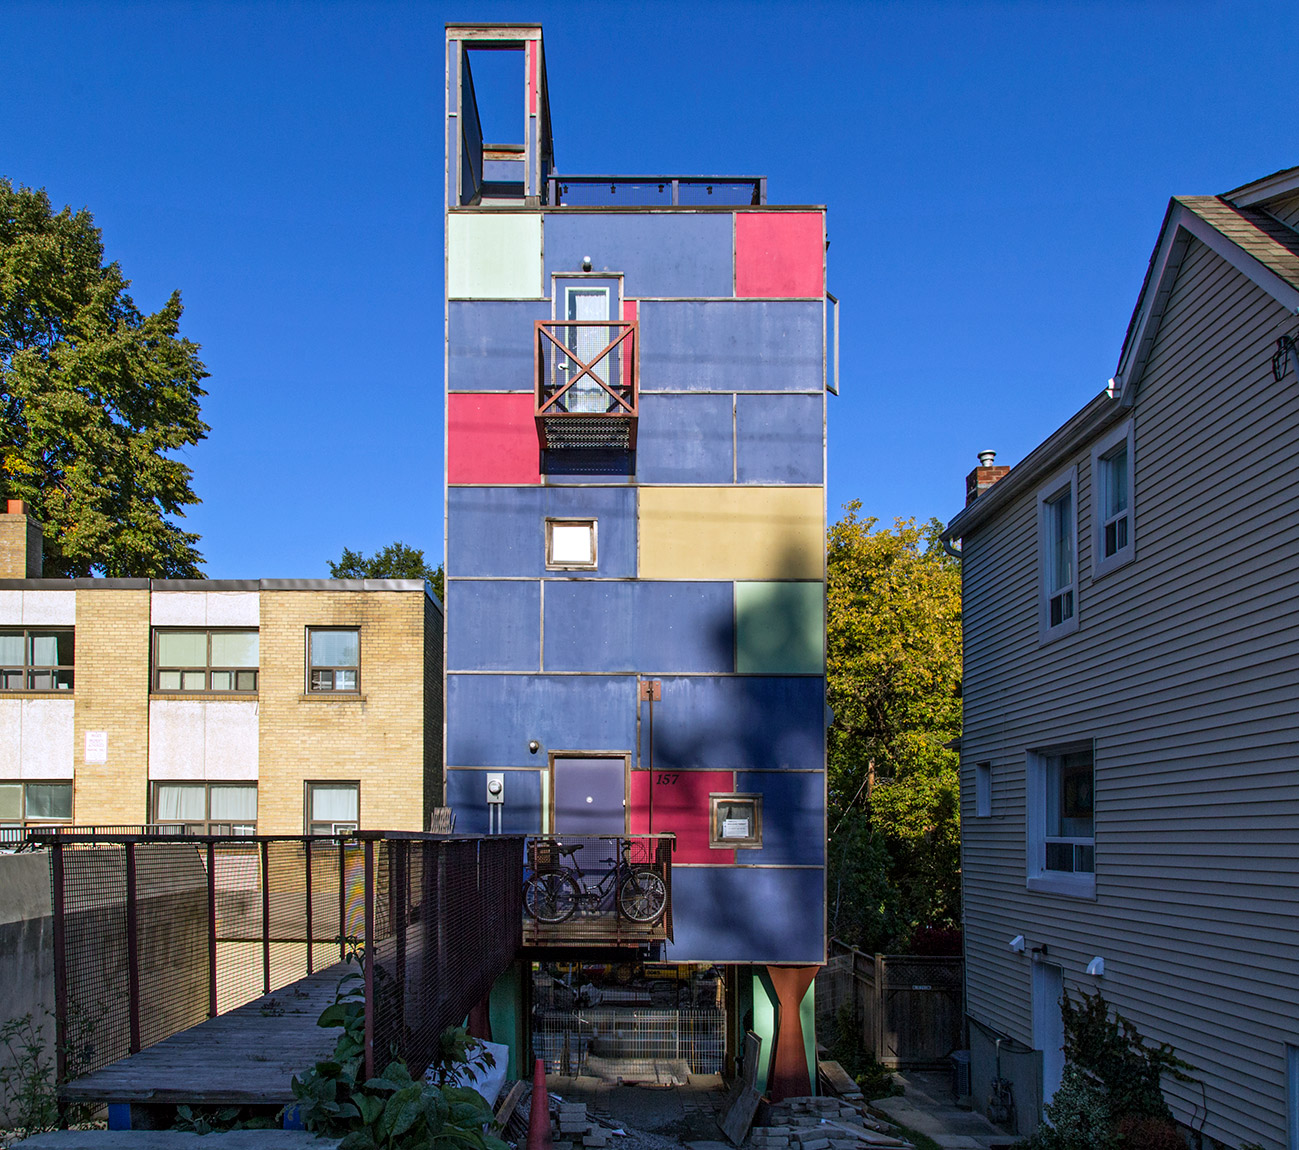 20141010. A most unusual house on Coxwell Avenue in Toronto